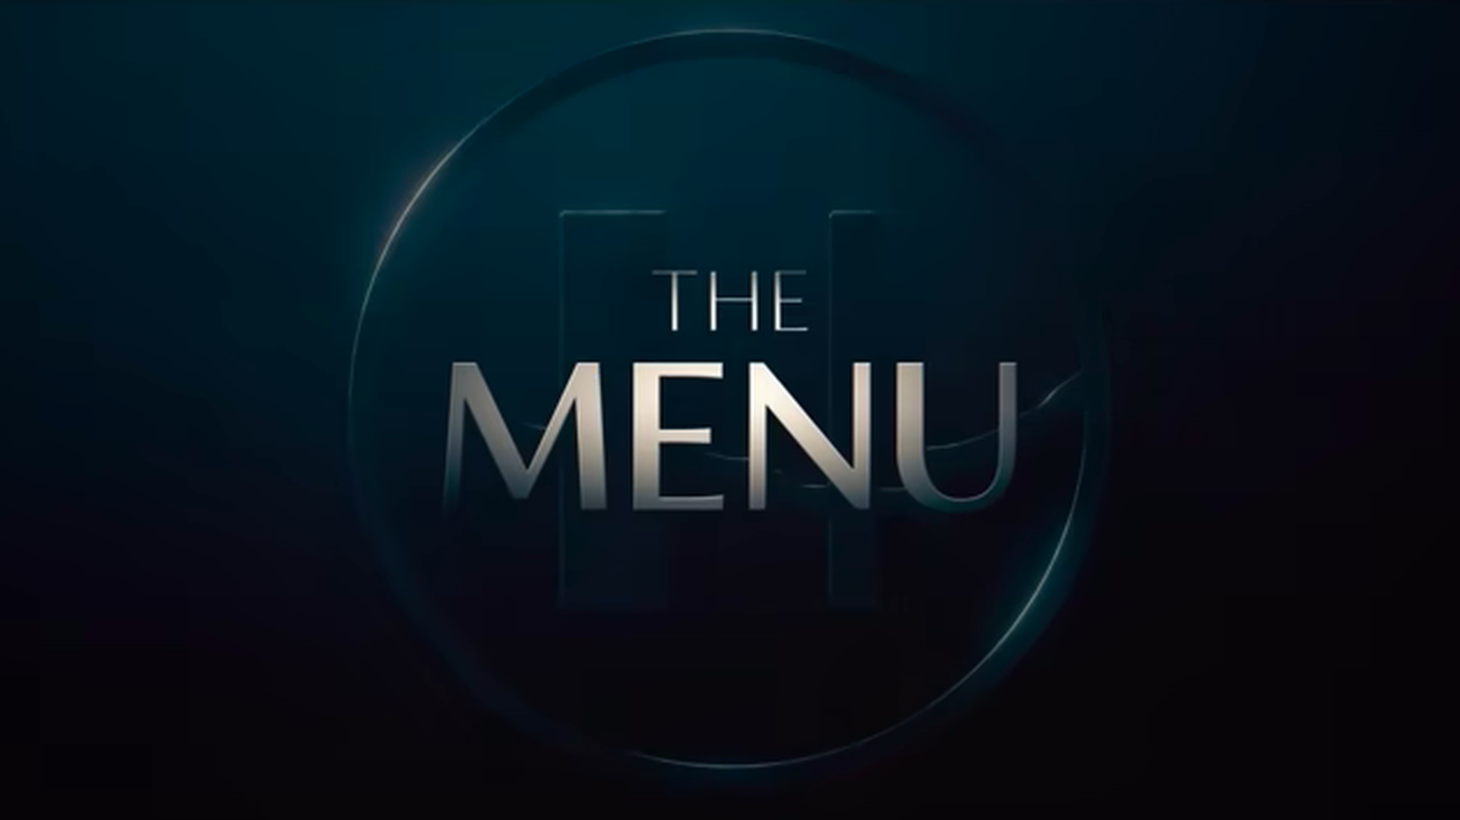 In “The Menu,” a couple enjoys an exorbitant menu when they eat at an exclusive restaurant, where the head chef is tyrannical and grim.